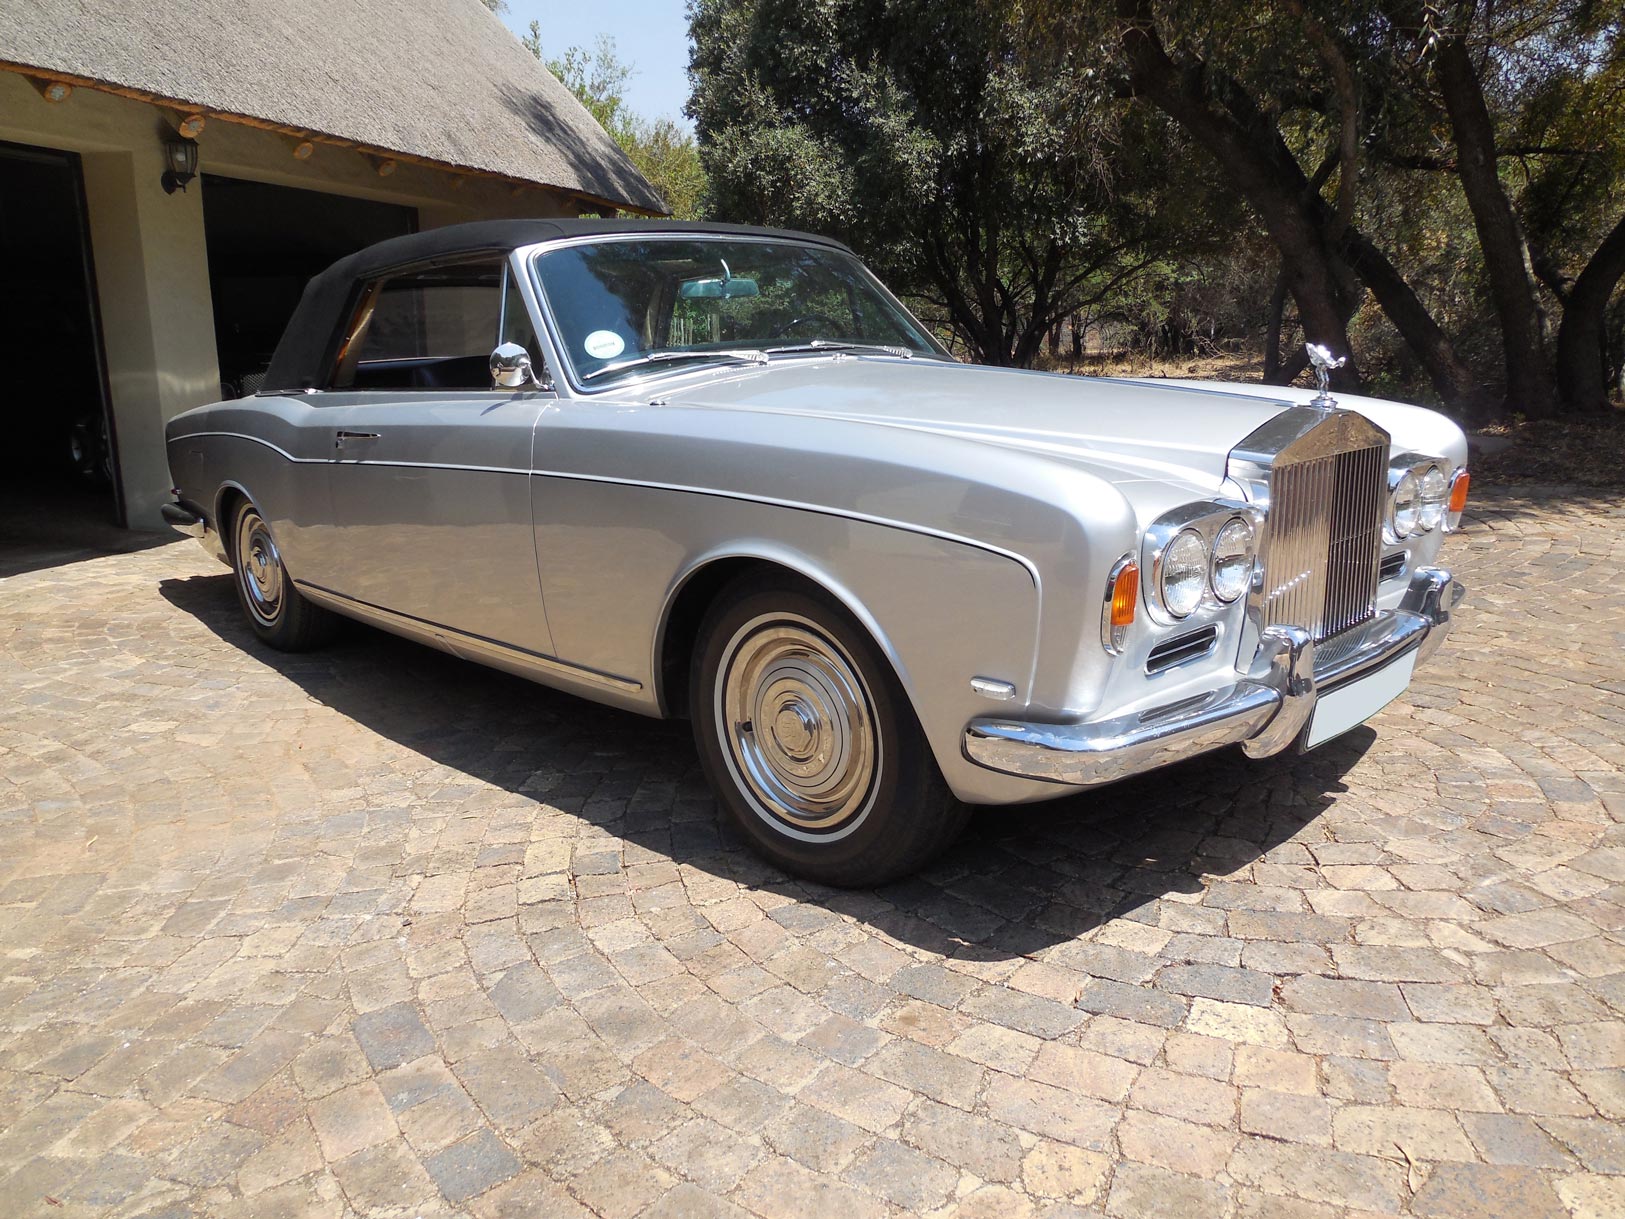 A 1968 ROLLS ROYCE MULLINER PARK WARD CONVERTIBLE Colour Silver Mink with black leather interior,